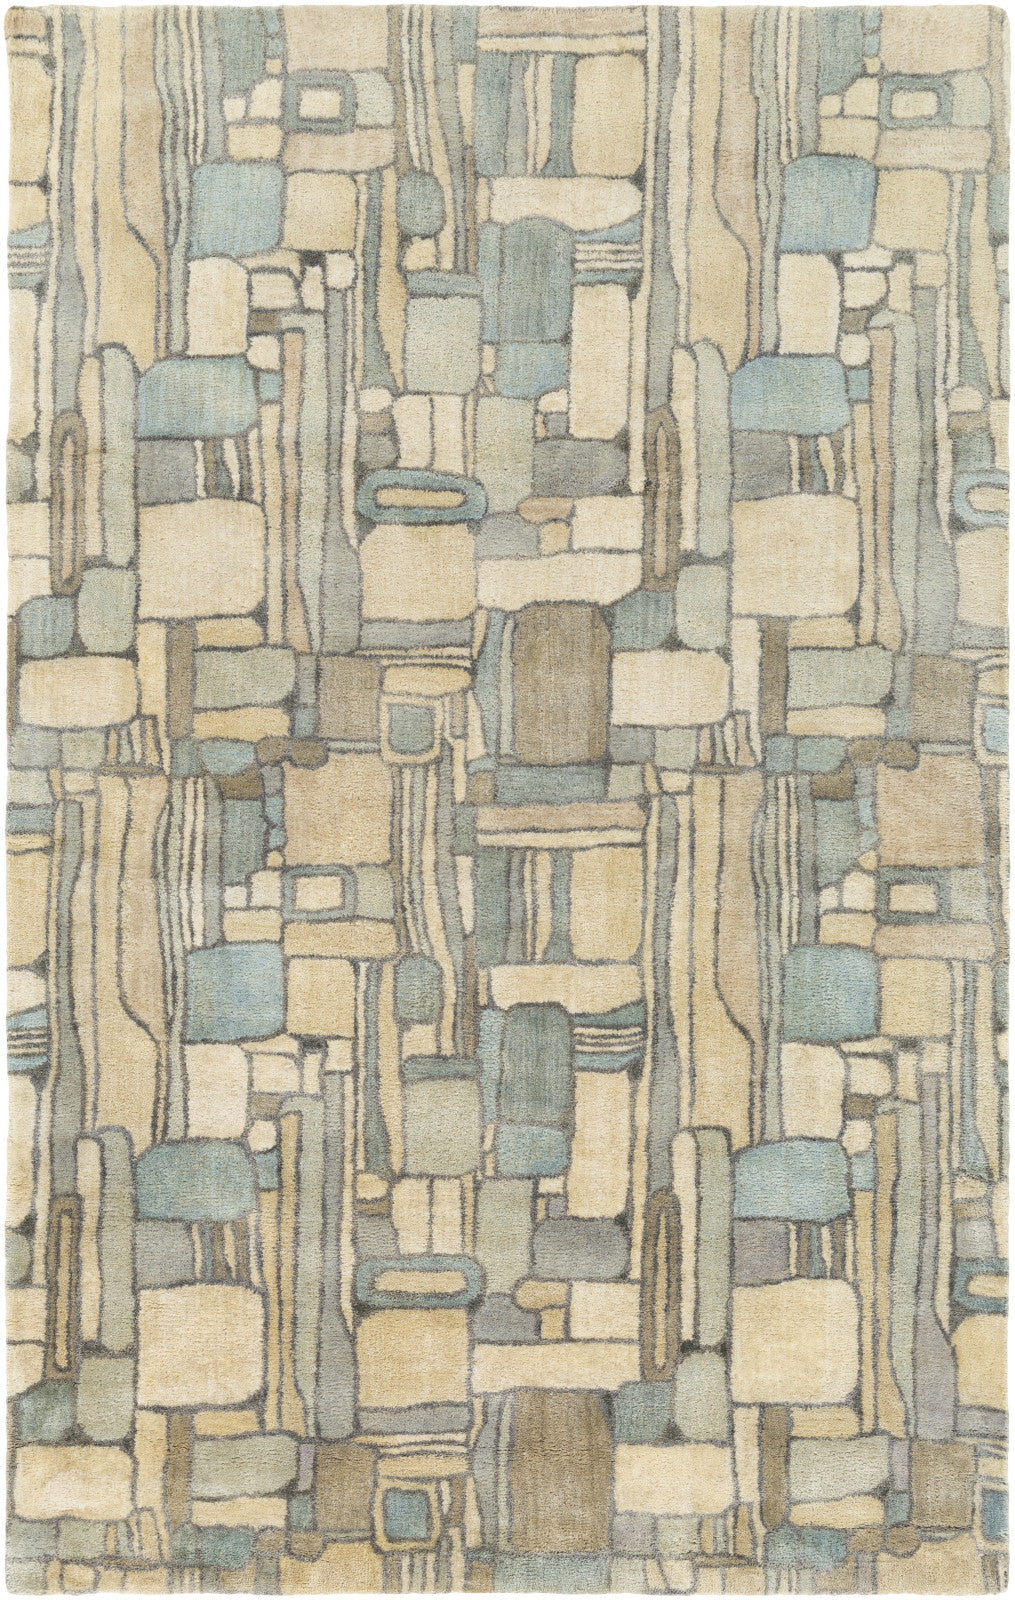 Surya Natural Affinity NTA-1002 White Area Rug by Shell Rummel